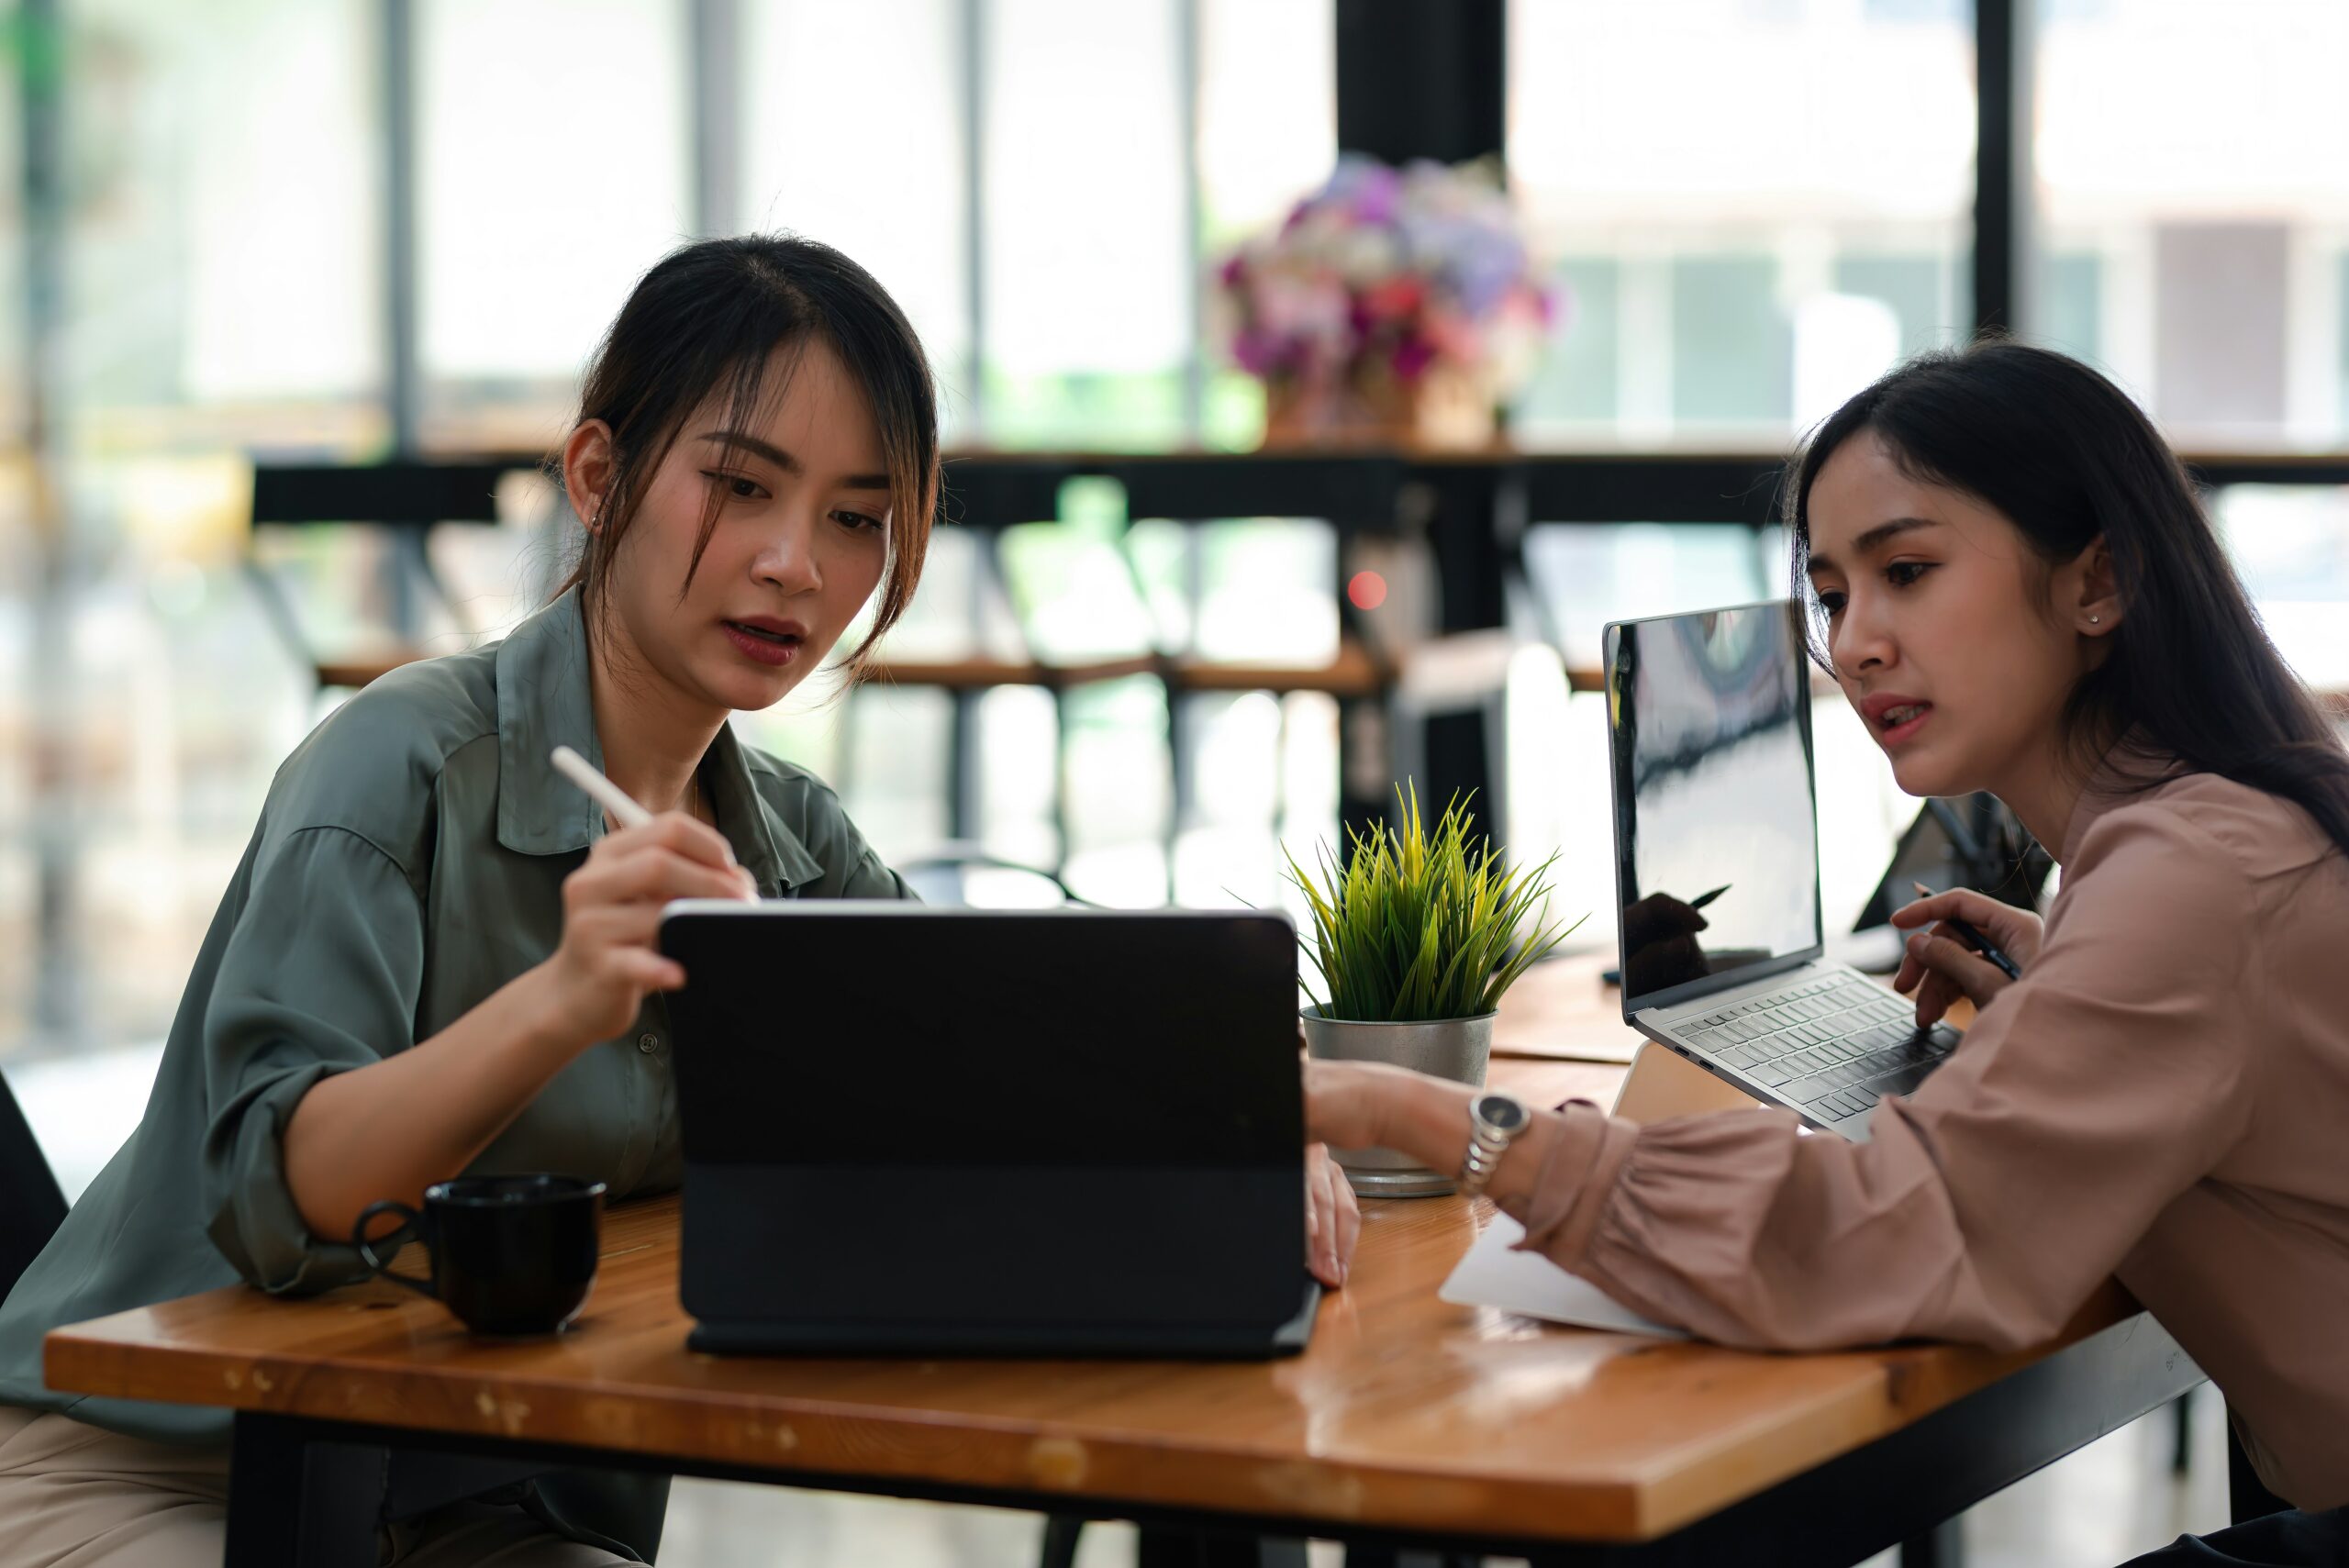 Two women, one an IT consultant, working on laptops in a modern office setting, discussing over digital tablets with coffee and indoor plants on the table.